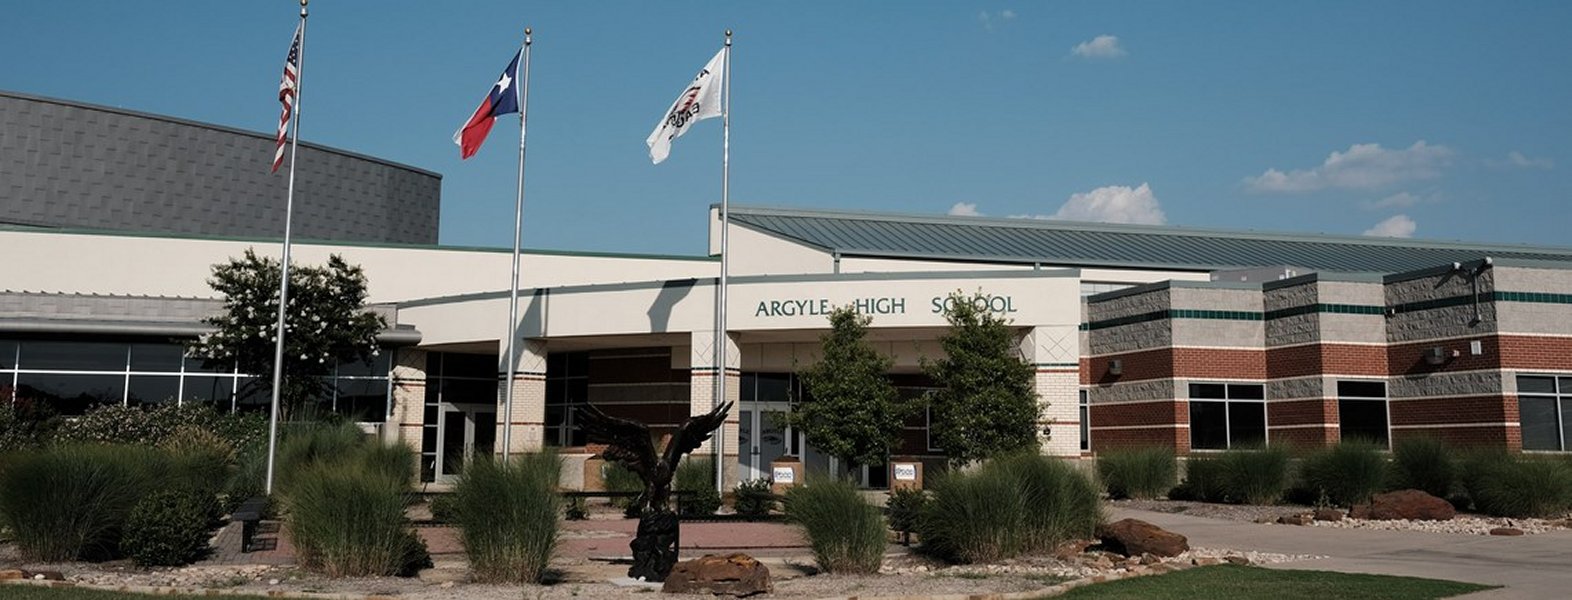 construction-begins-on-new-addition-at-argyle-high-school-cross